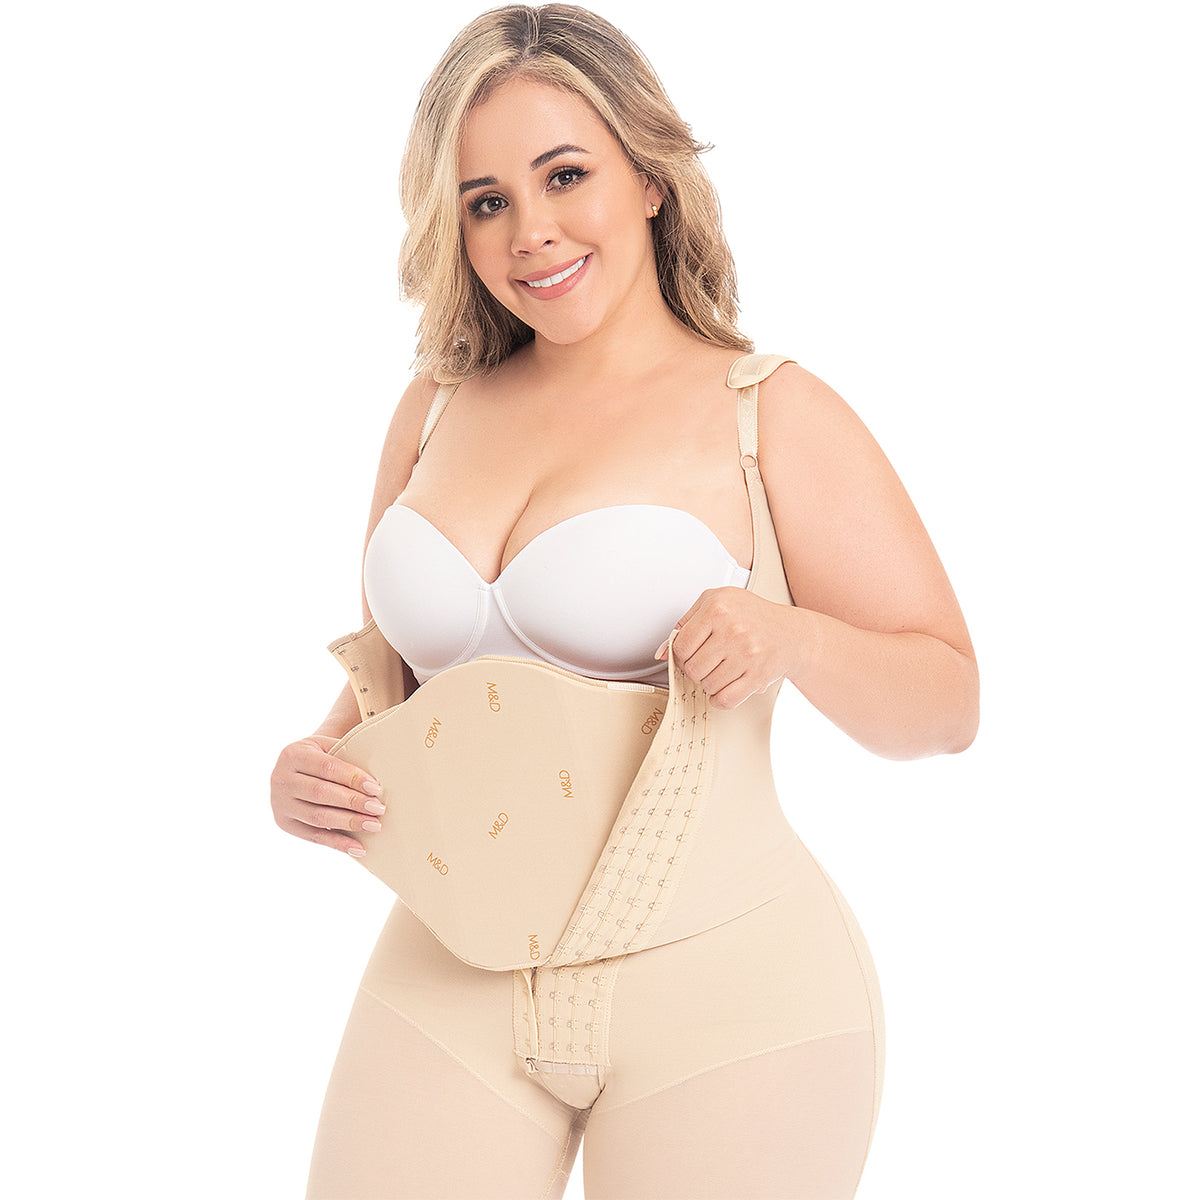 Be Shapy | M&D 0102 Liposuction Compression Board | Ab Board + Lipo Foam  after Surgery